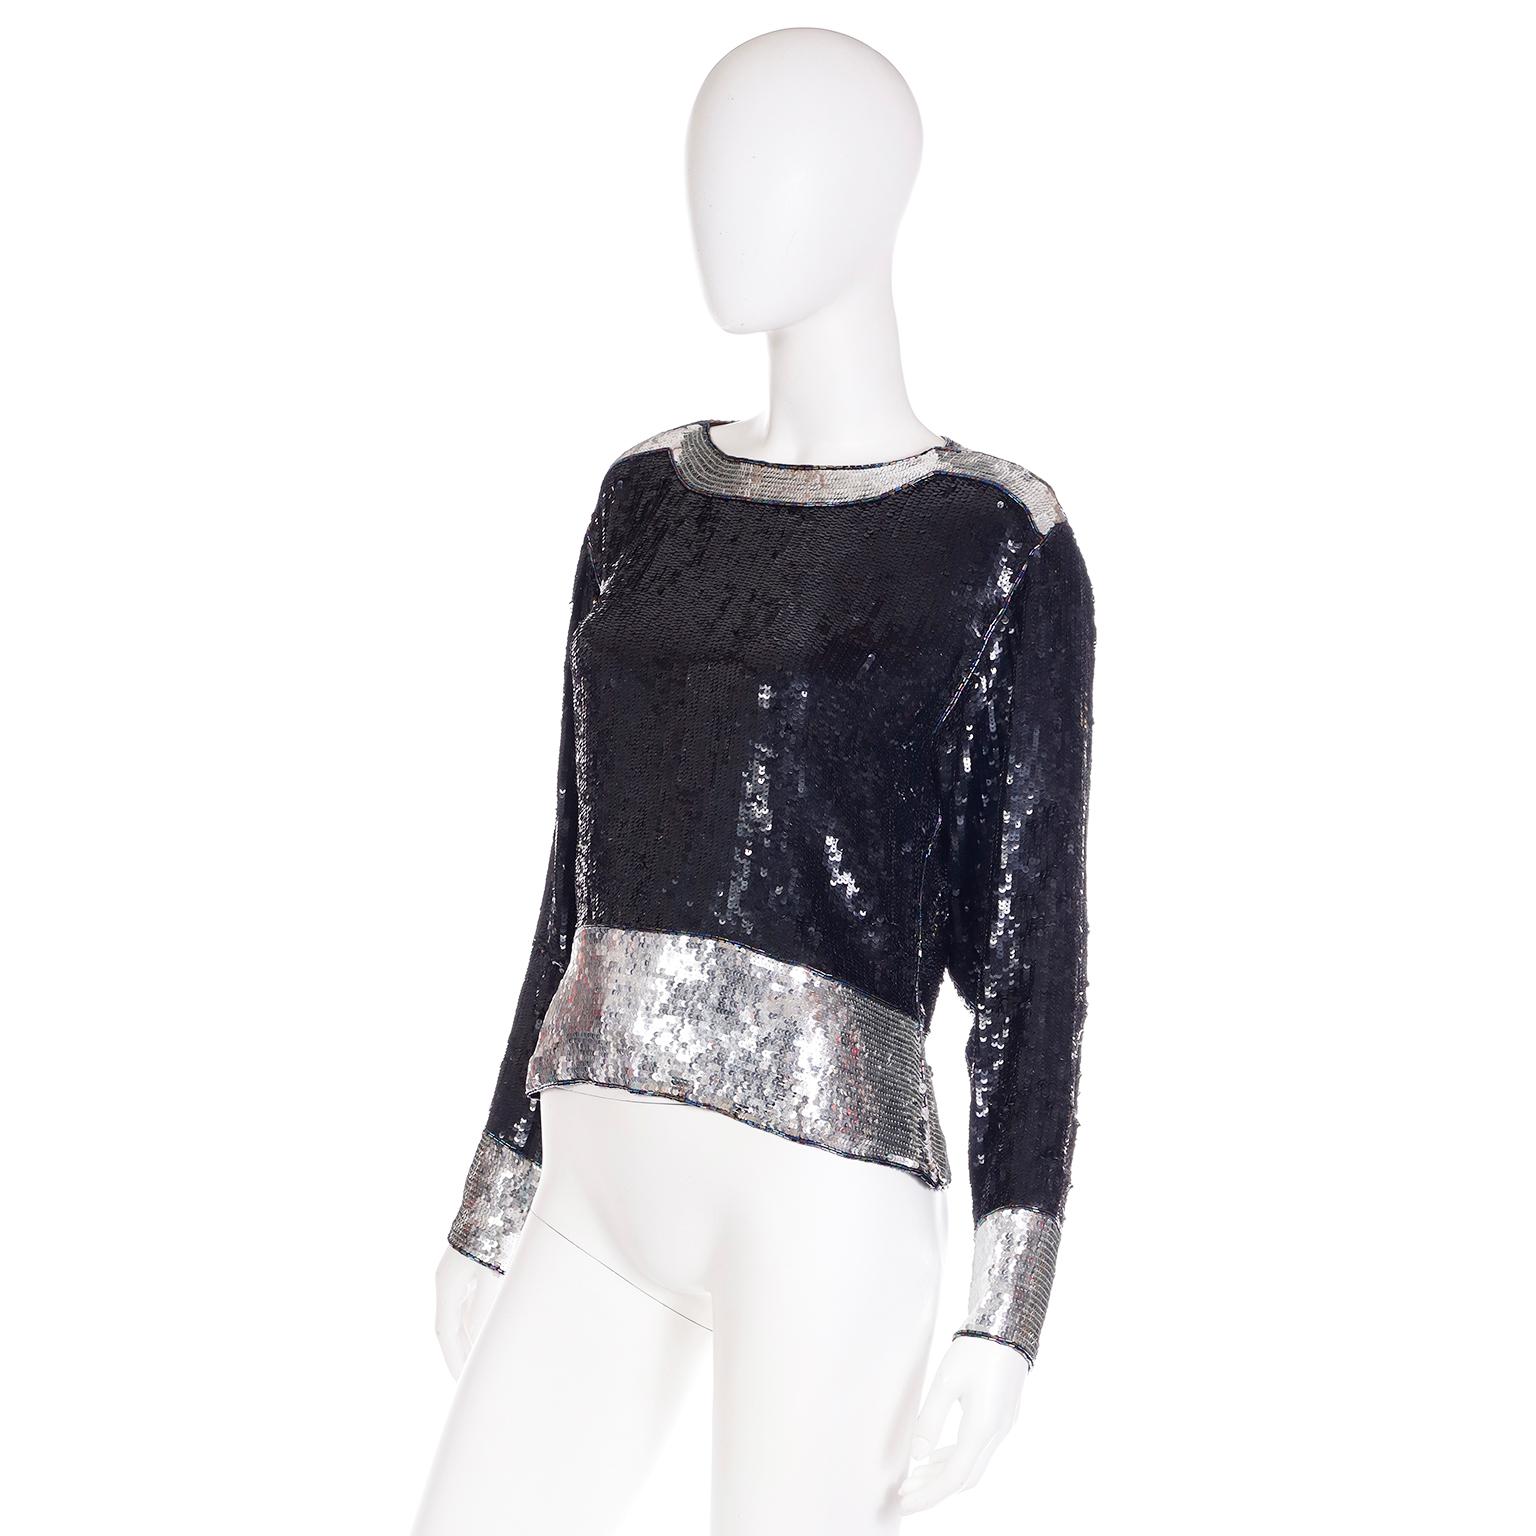 1970s Yves Saint Laurent Vintage Black & Silver Beaded Top W Beads & Sequins For Sale 1